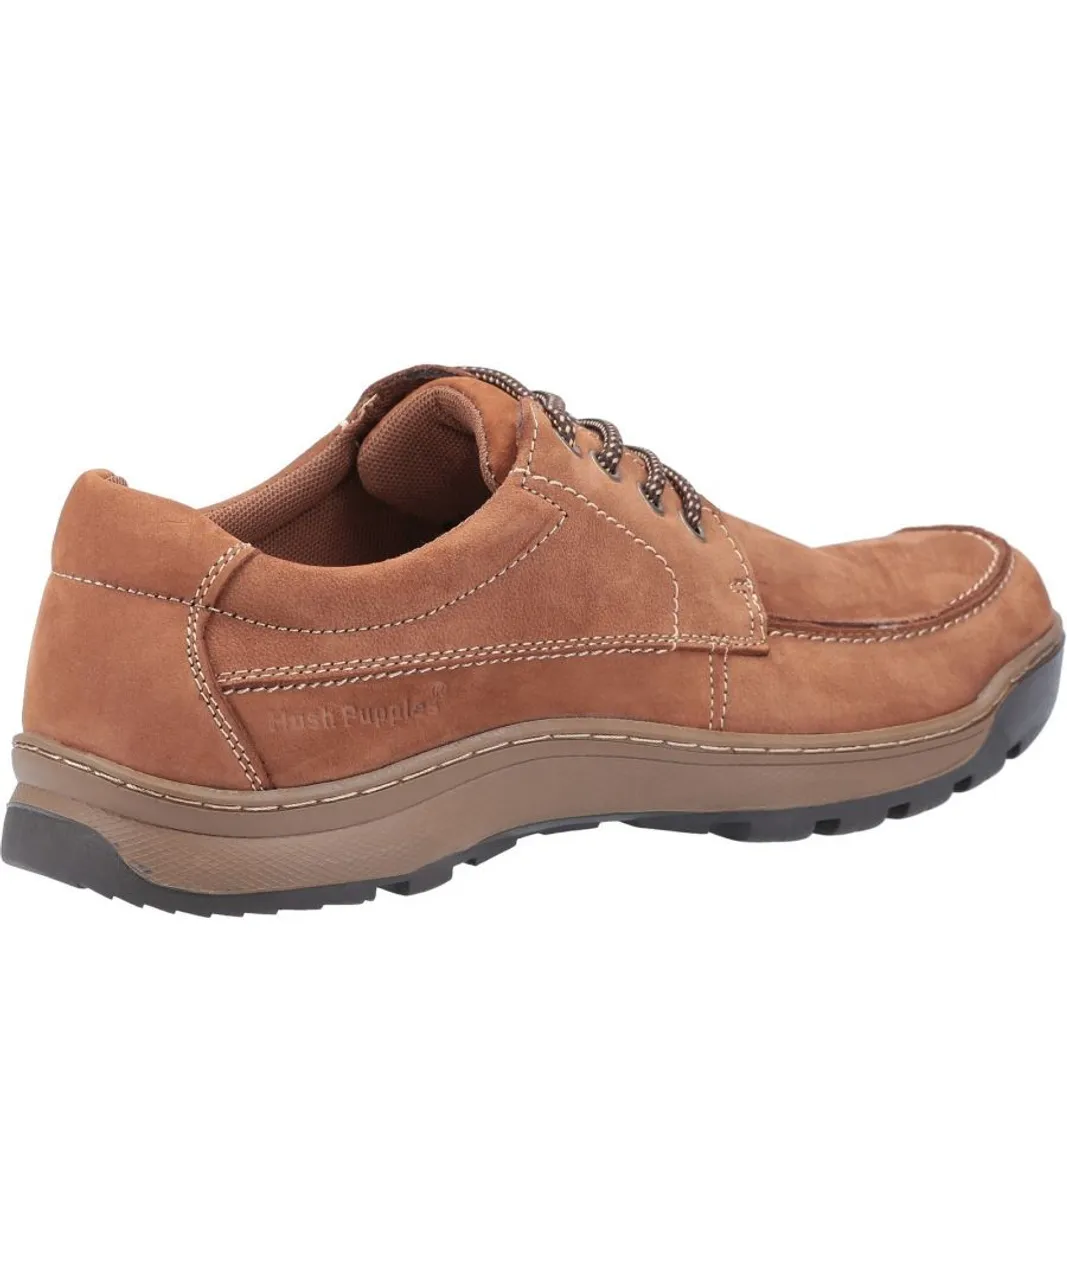 Hush Puppies Mens Tucker Lace Shoe - Tan Leather